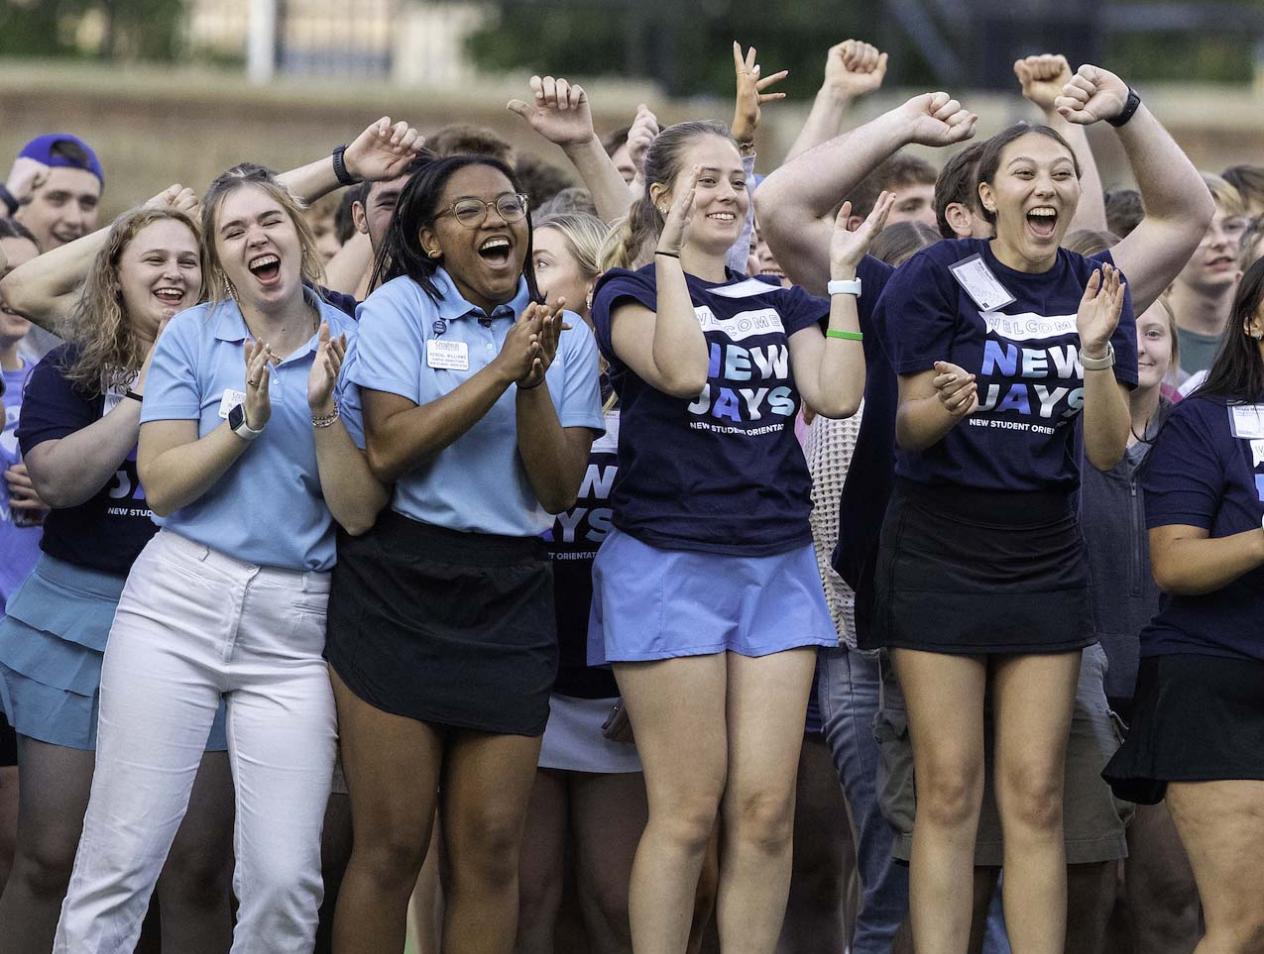 Students cheering at Move-In weekend activities.